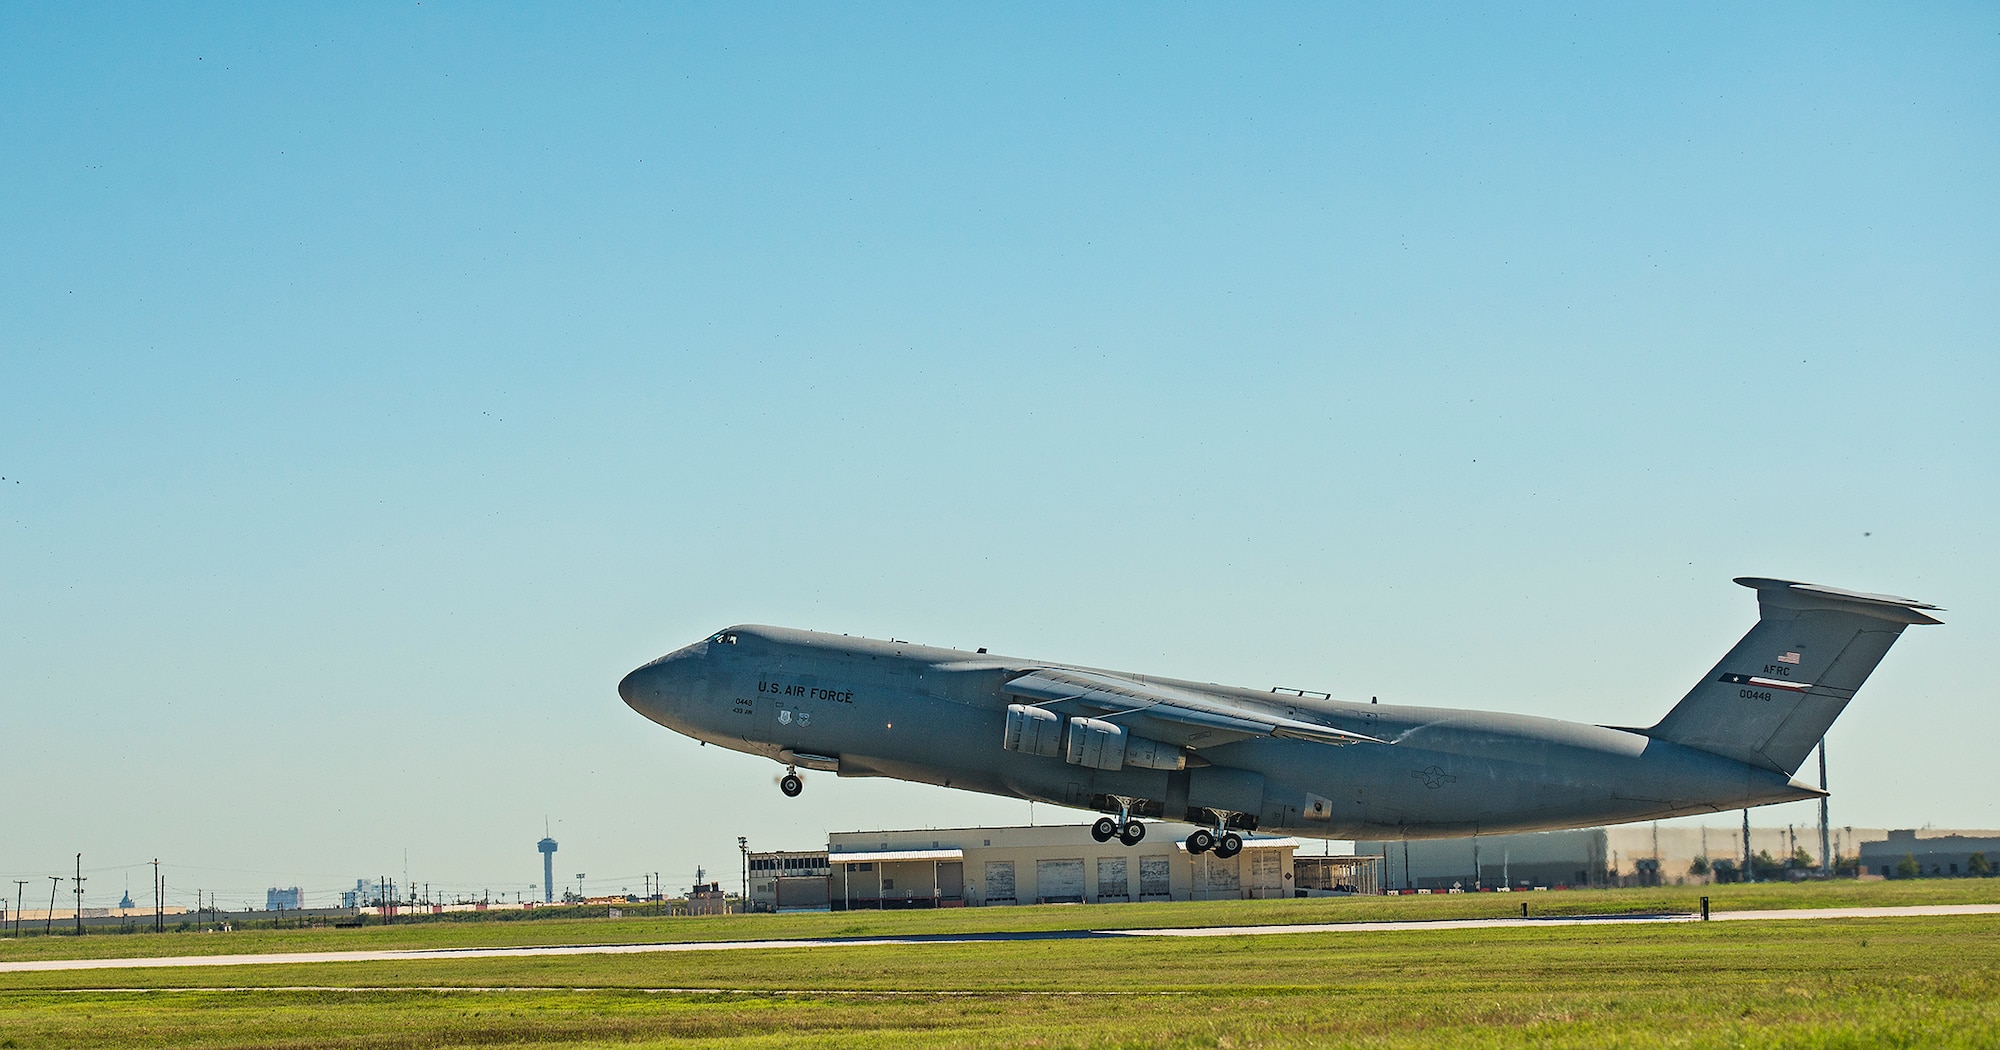 The last 433rd Airlift Wing C-5A Galaxy aircraft, tail number 70-0448, departs from Joint Base San Antonio-Lackland, Texas Sept. 28, 2016. The Alamo Wing will receive eight C-5M Super Galaxy aircraft to support the U.S. Air Force’s rapid global mobility mission.  (U.S. Air Force photo by Benjamin Faske)  